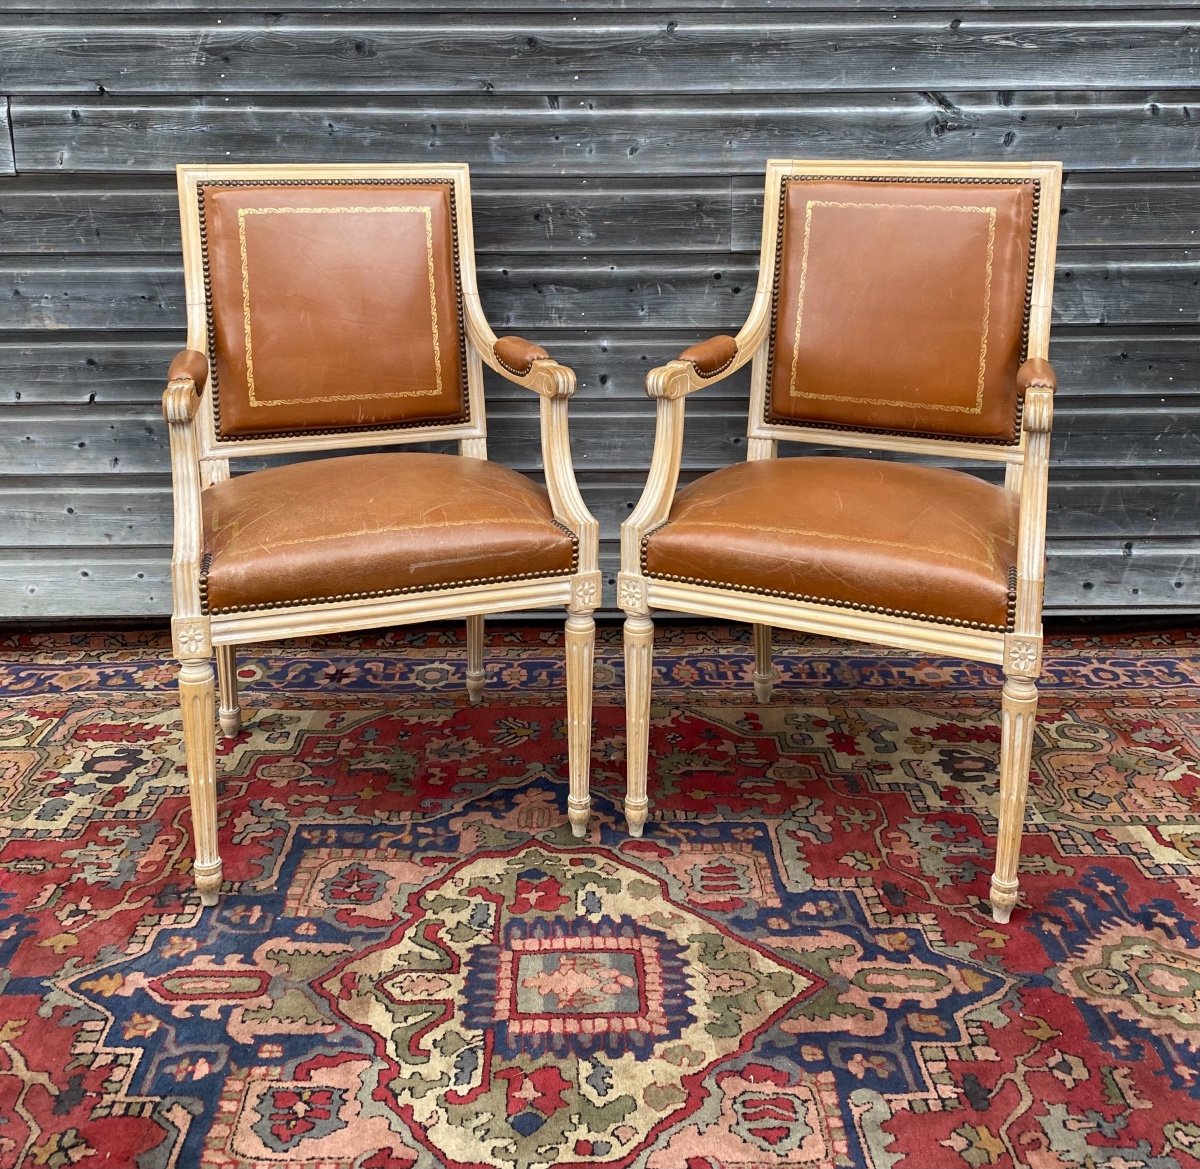 Pair Of Louis XVI Style Lacquered Wood Armchairs